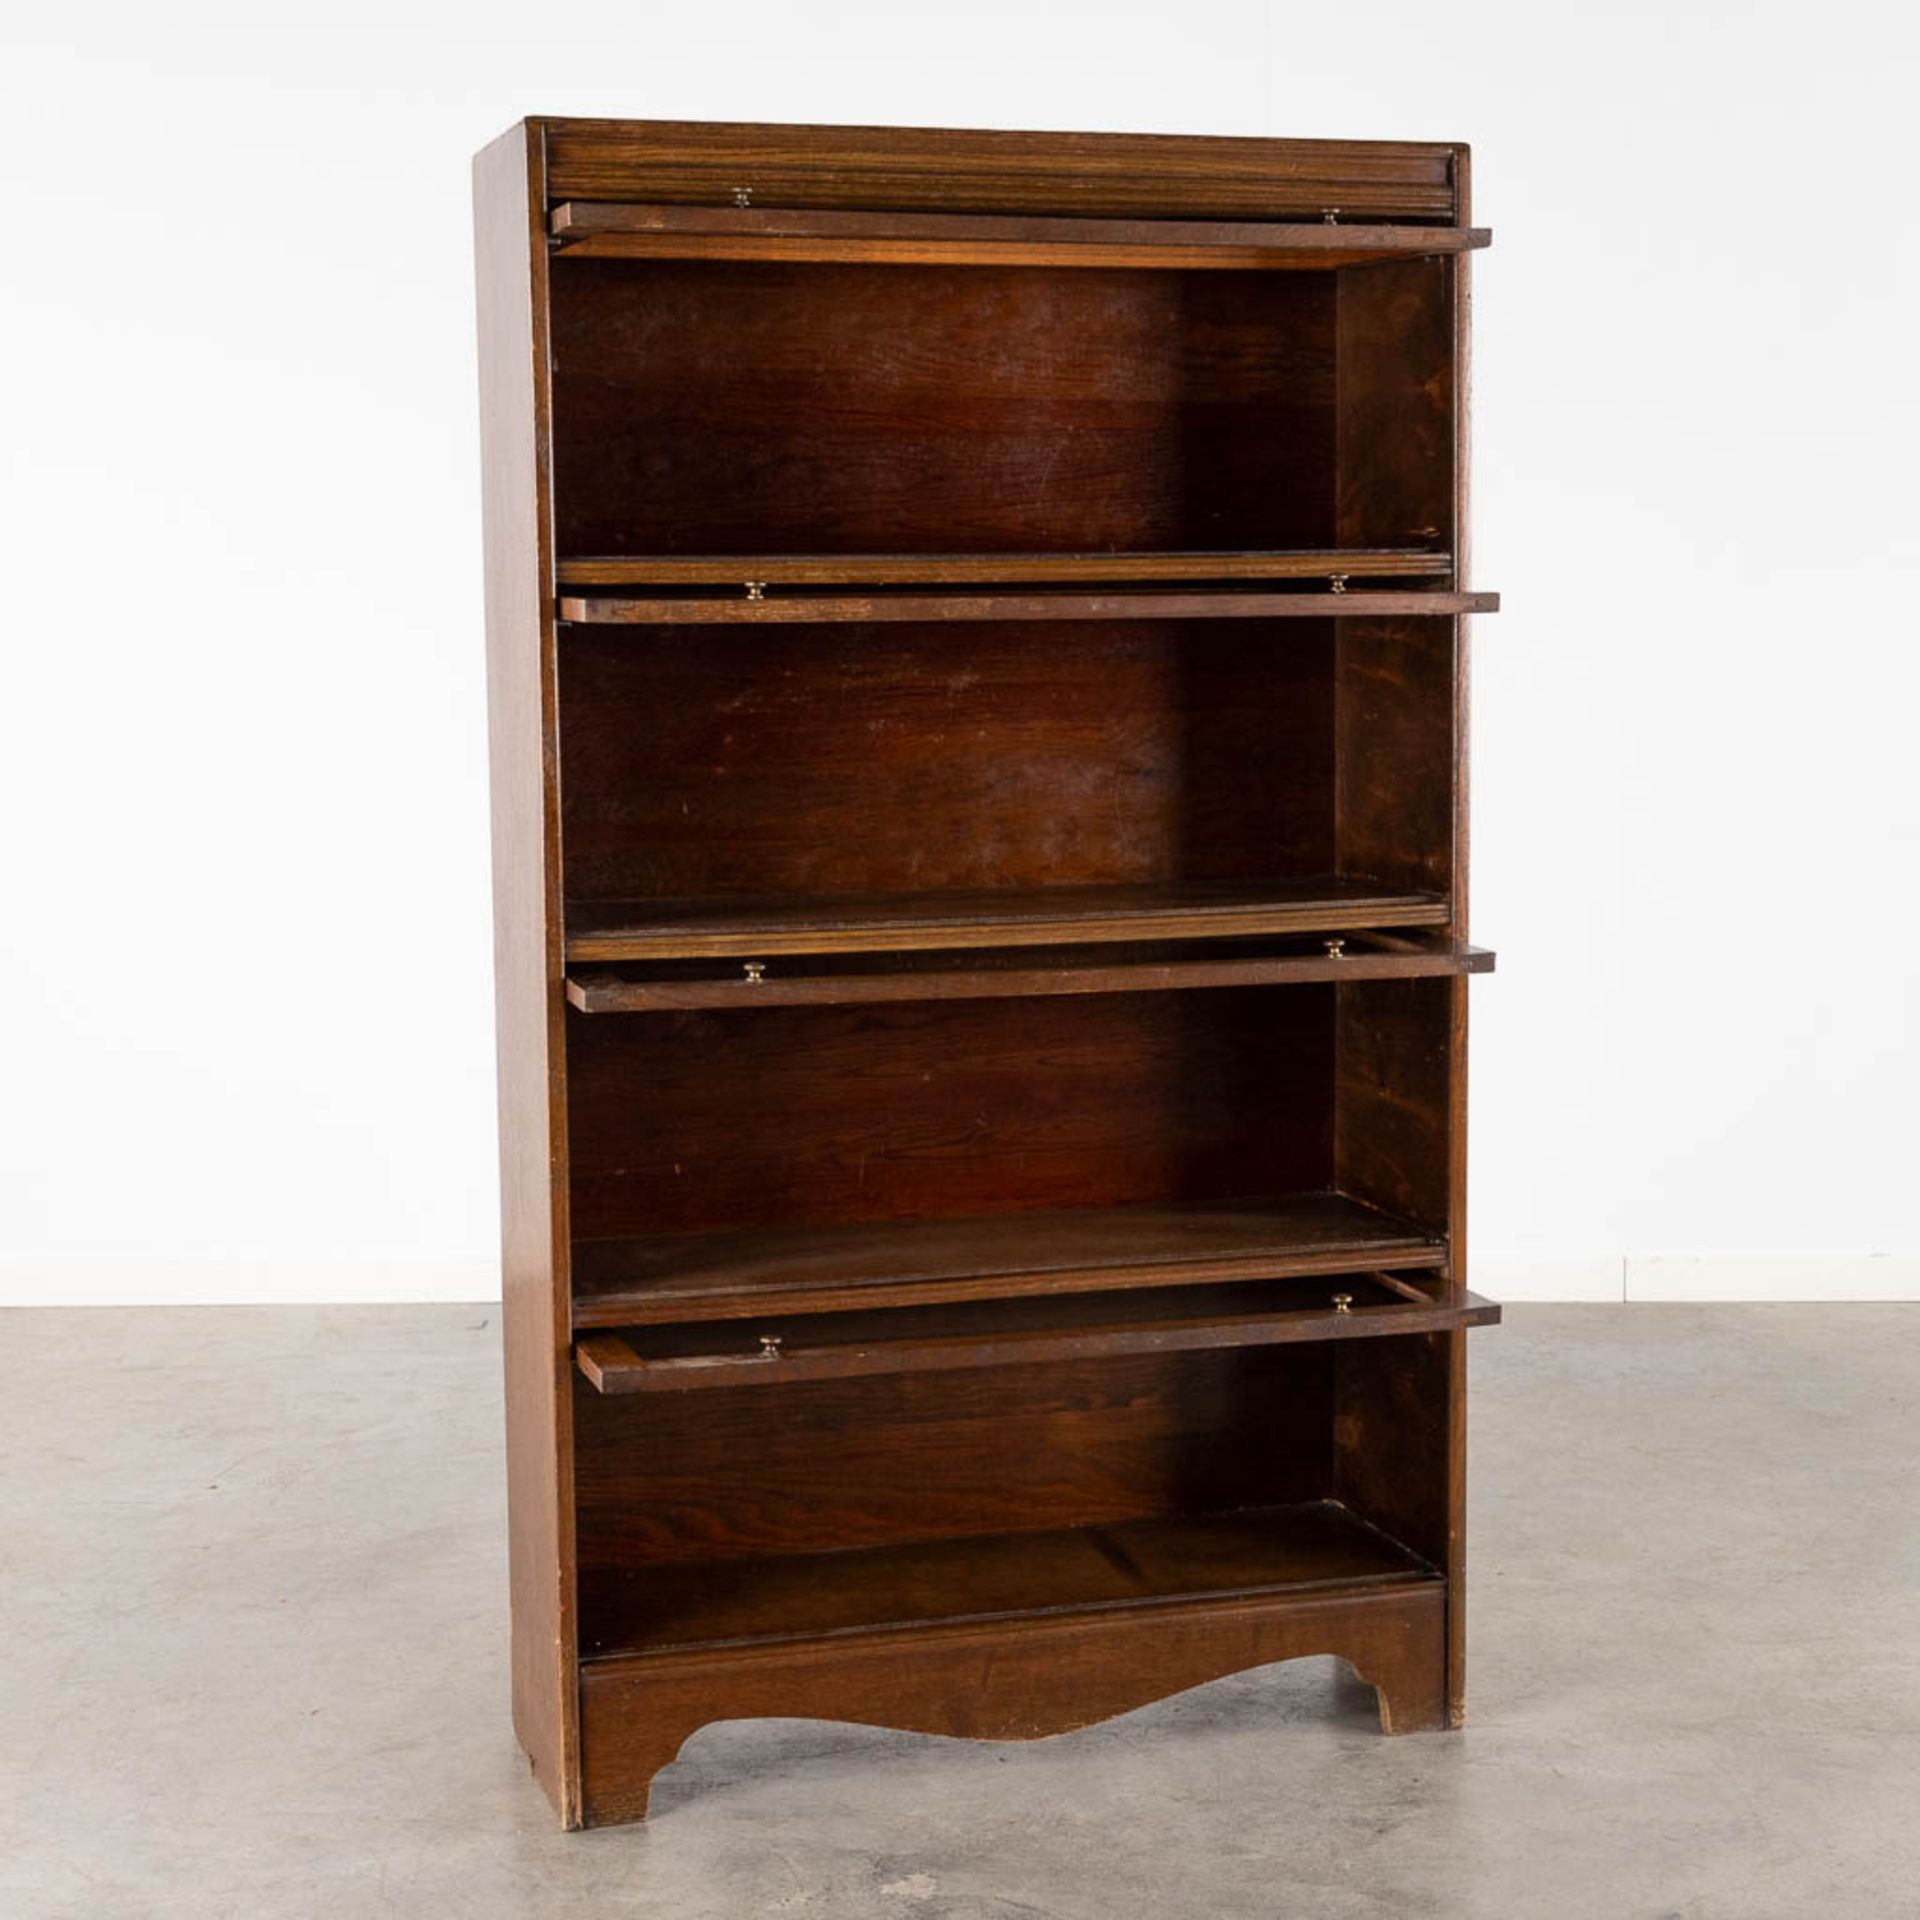 An antique English 'Barrister' bookcase, drop down glass doors. (D:30 x W:89 cm) - Image 3 of 10